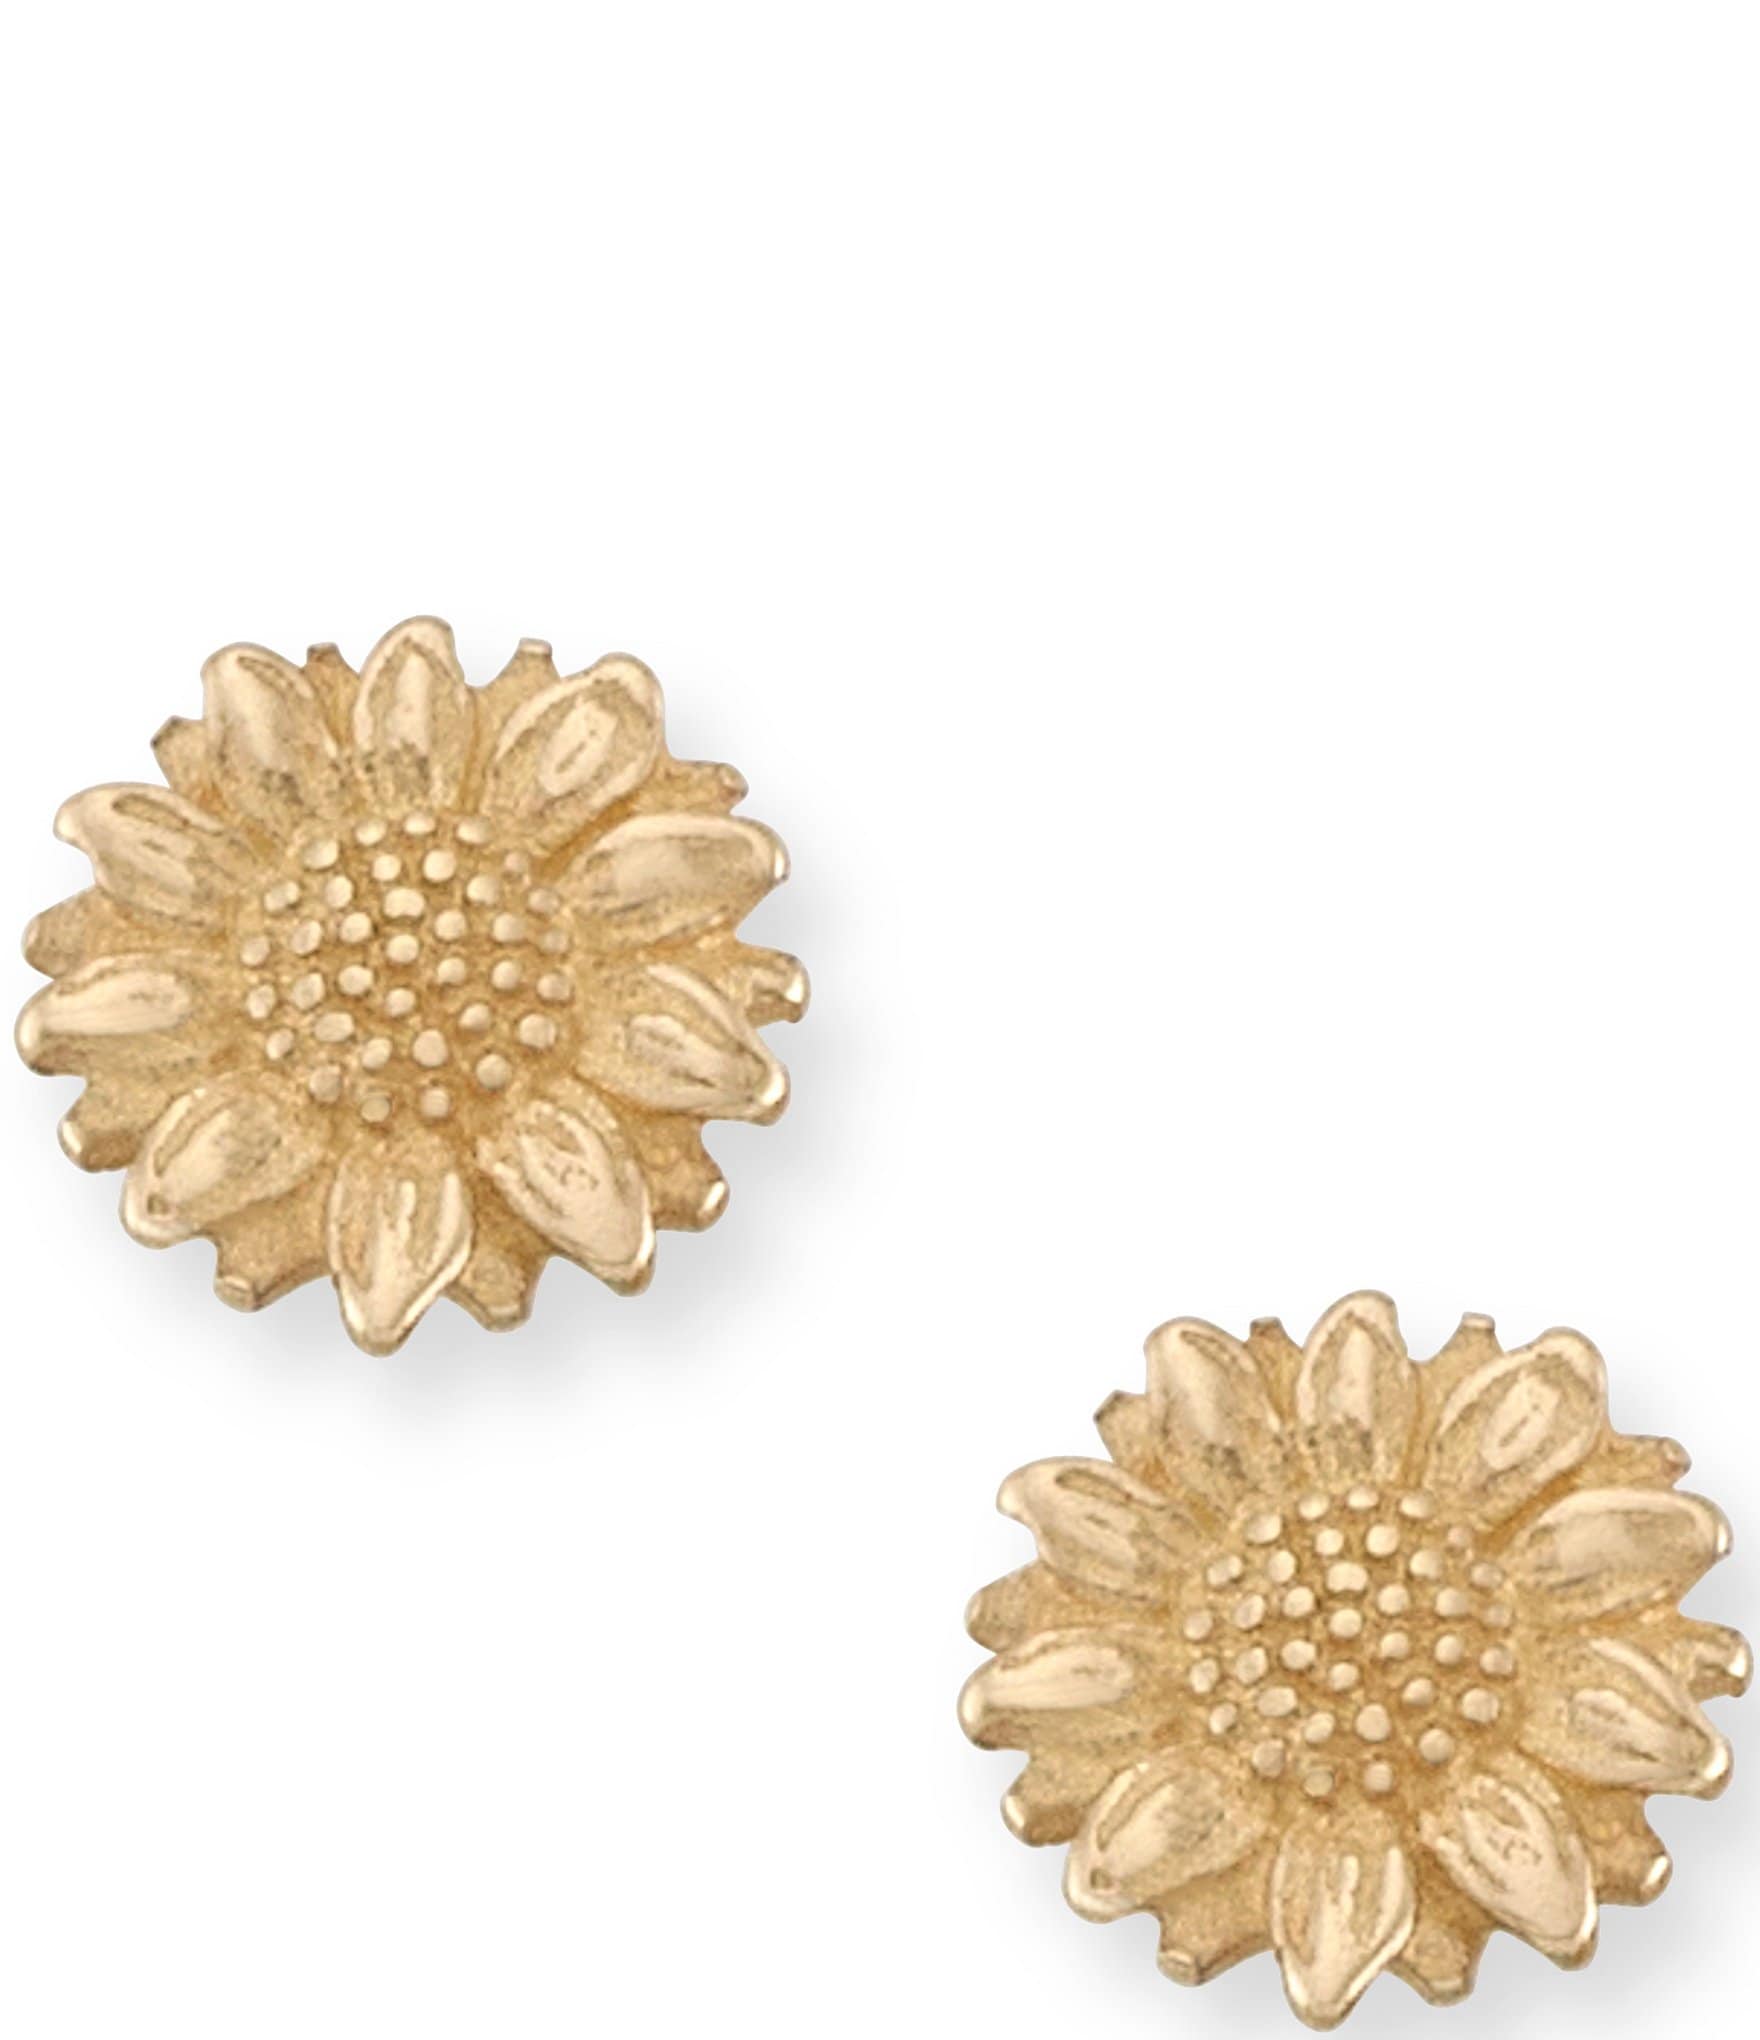 Gold Earrings - Gold Earrings updated their profile picture. | Facebook